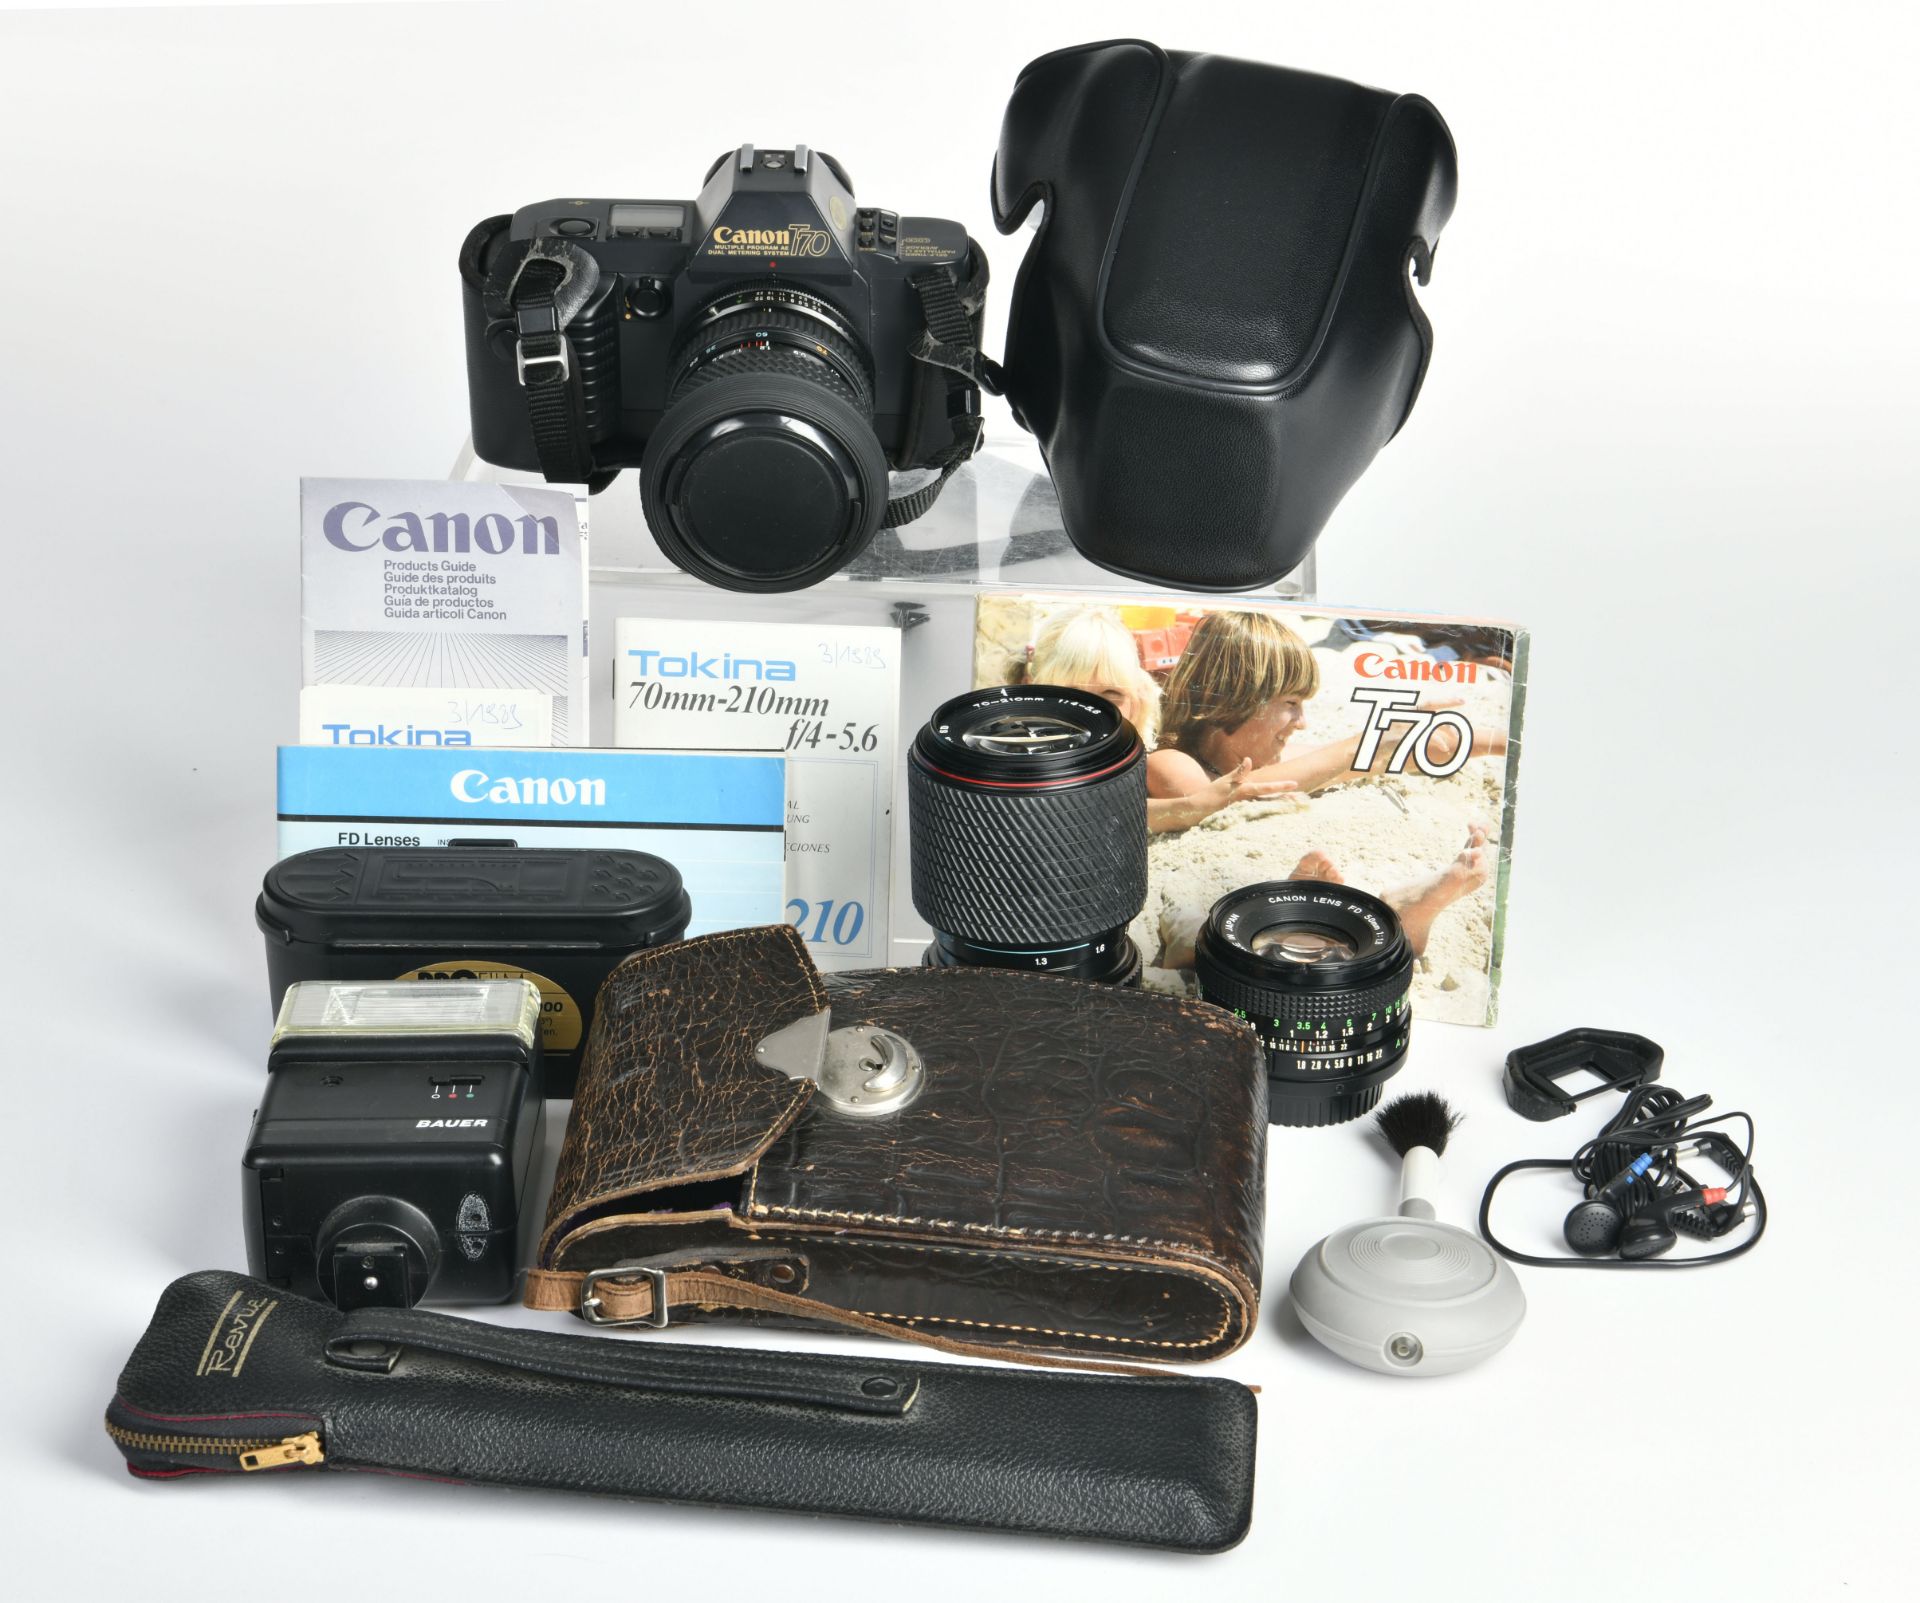 Canon, T 70 reflex camera with 1,8 50mm and Tokina 28-70,70-210mm+Bauer flash unit, C 2/2-